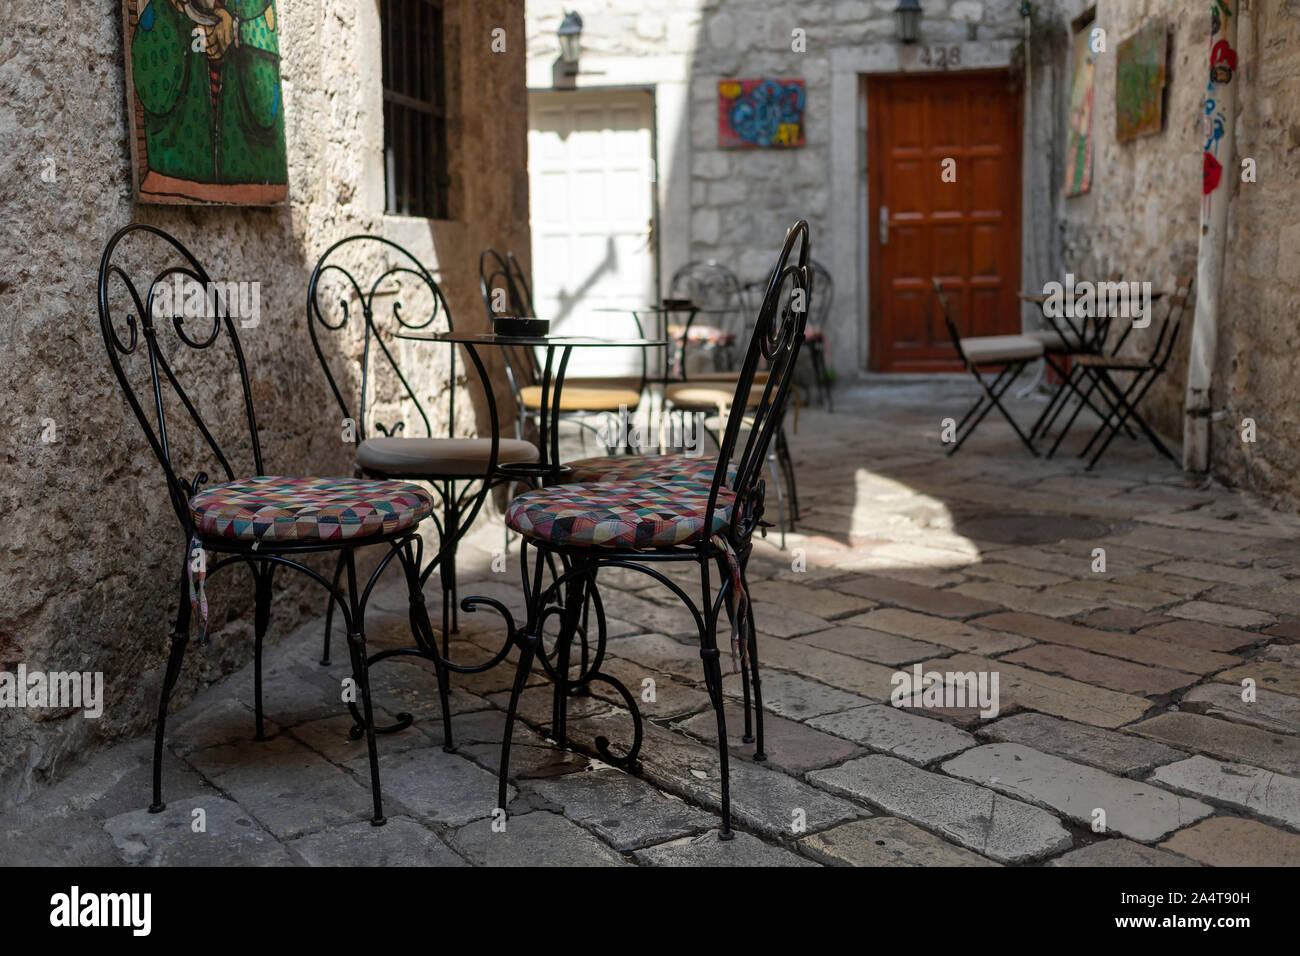 Montenegro - An empty street café in Old Town of Kotor Stock Photo